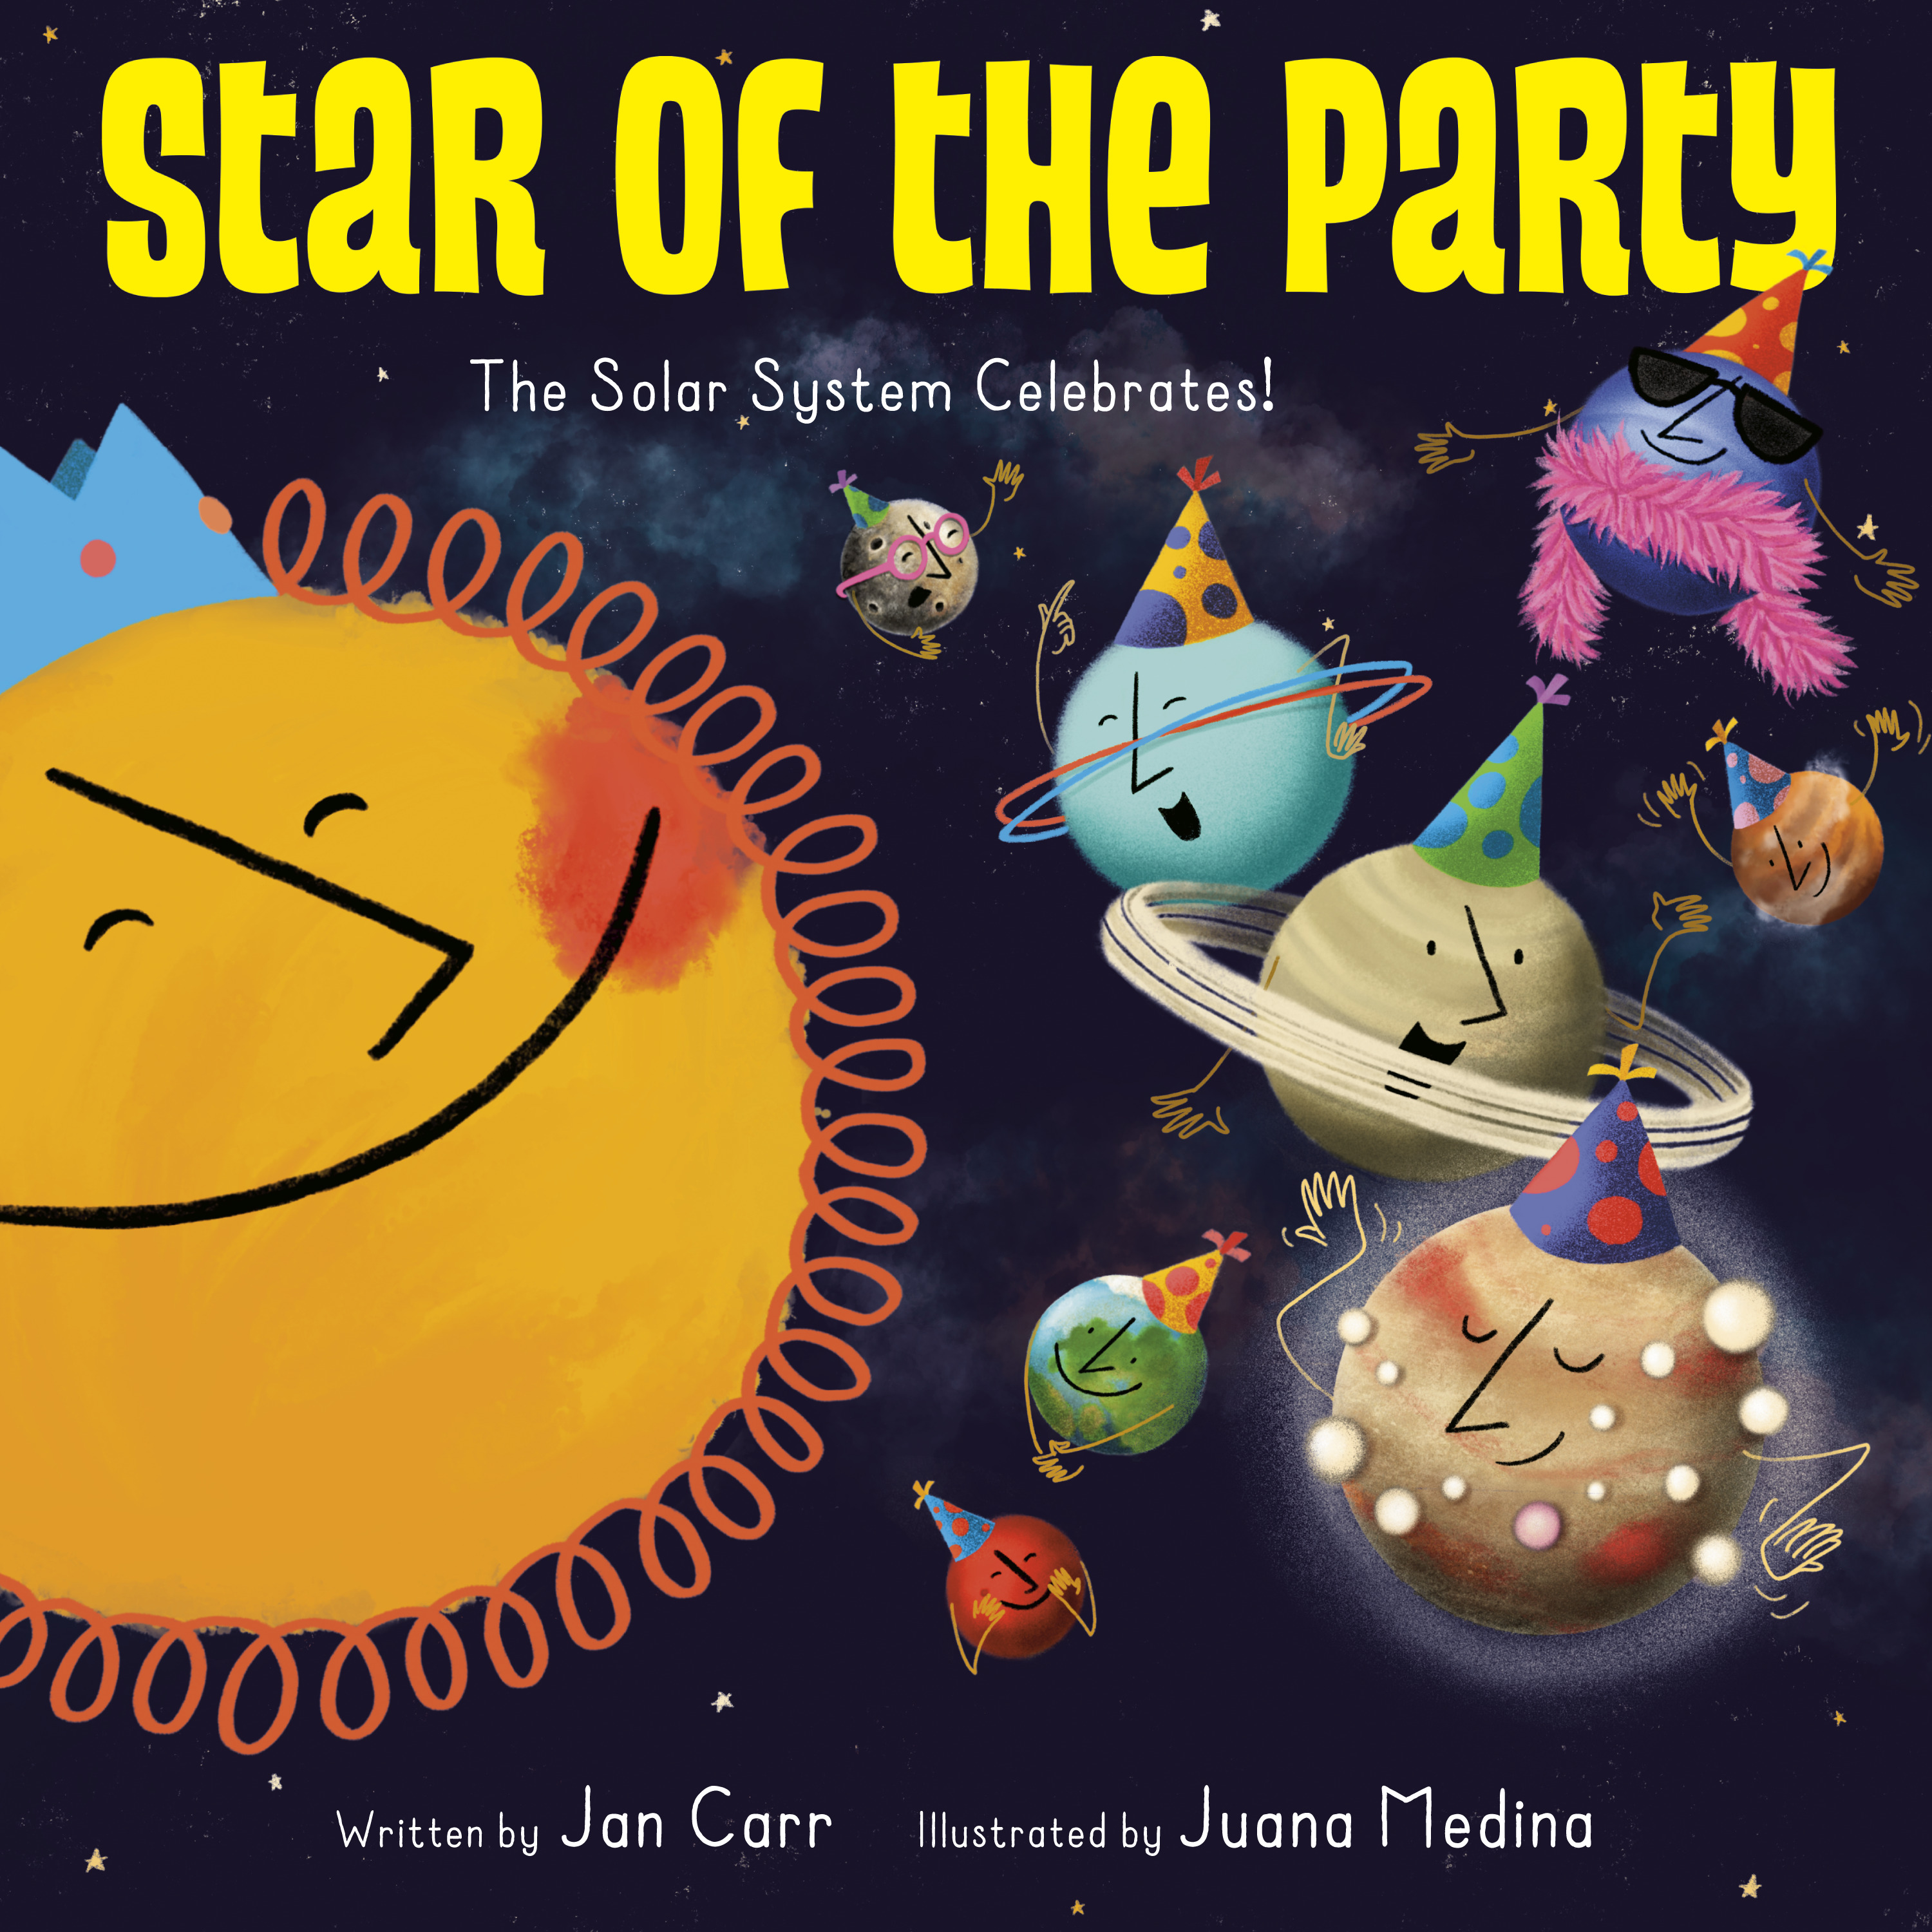 Star of the Party: The Solar System Celebrates! : The Solar System Celebrates! | 6-8 years old